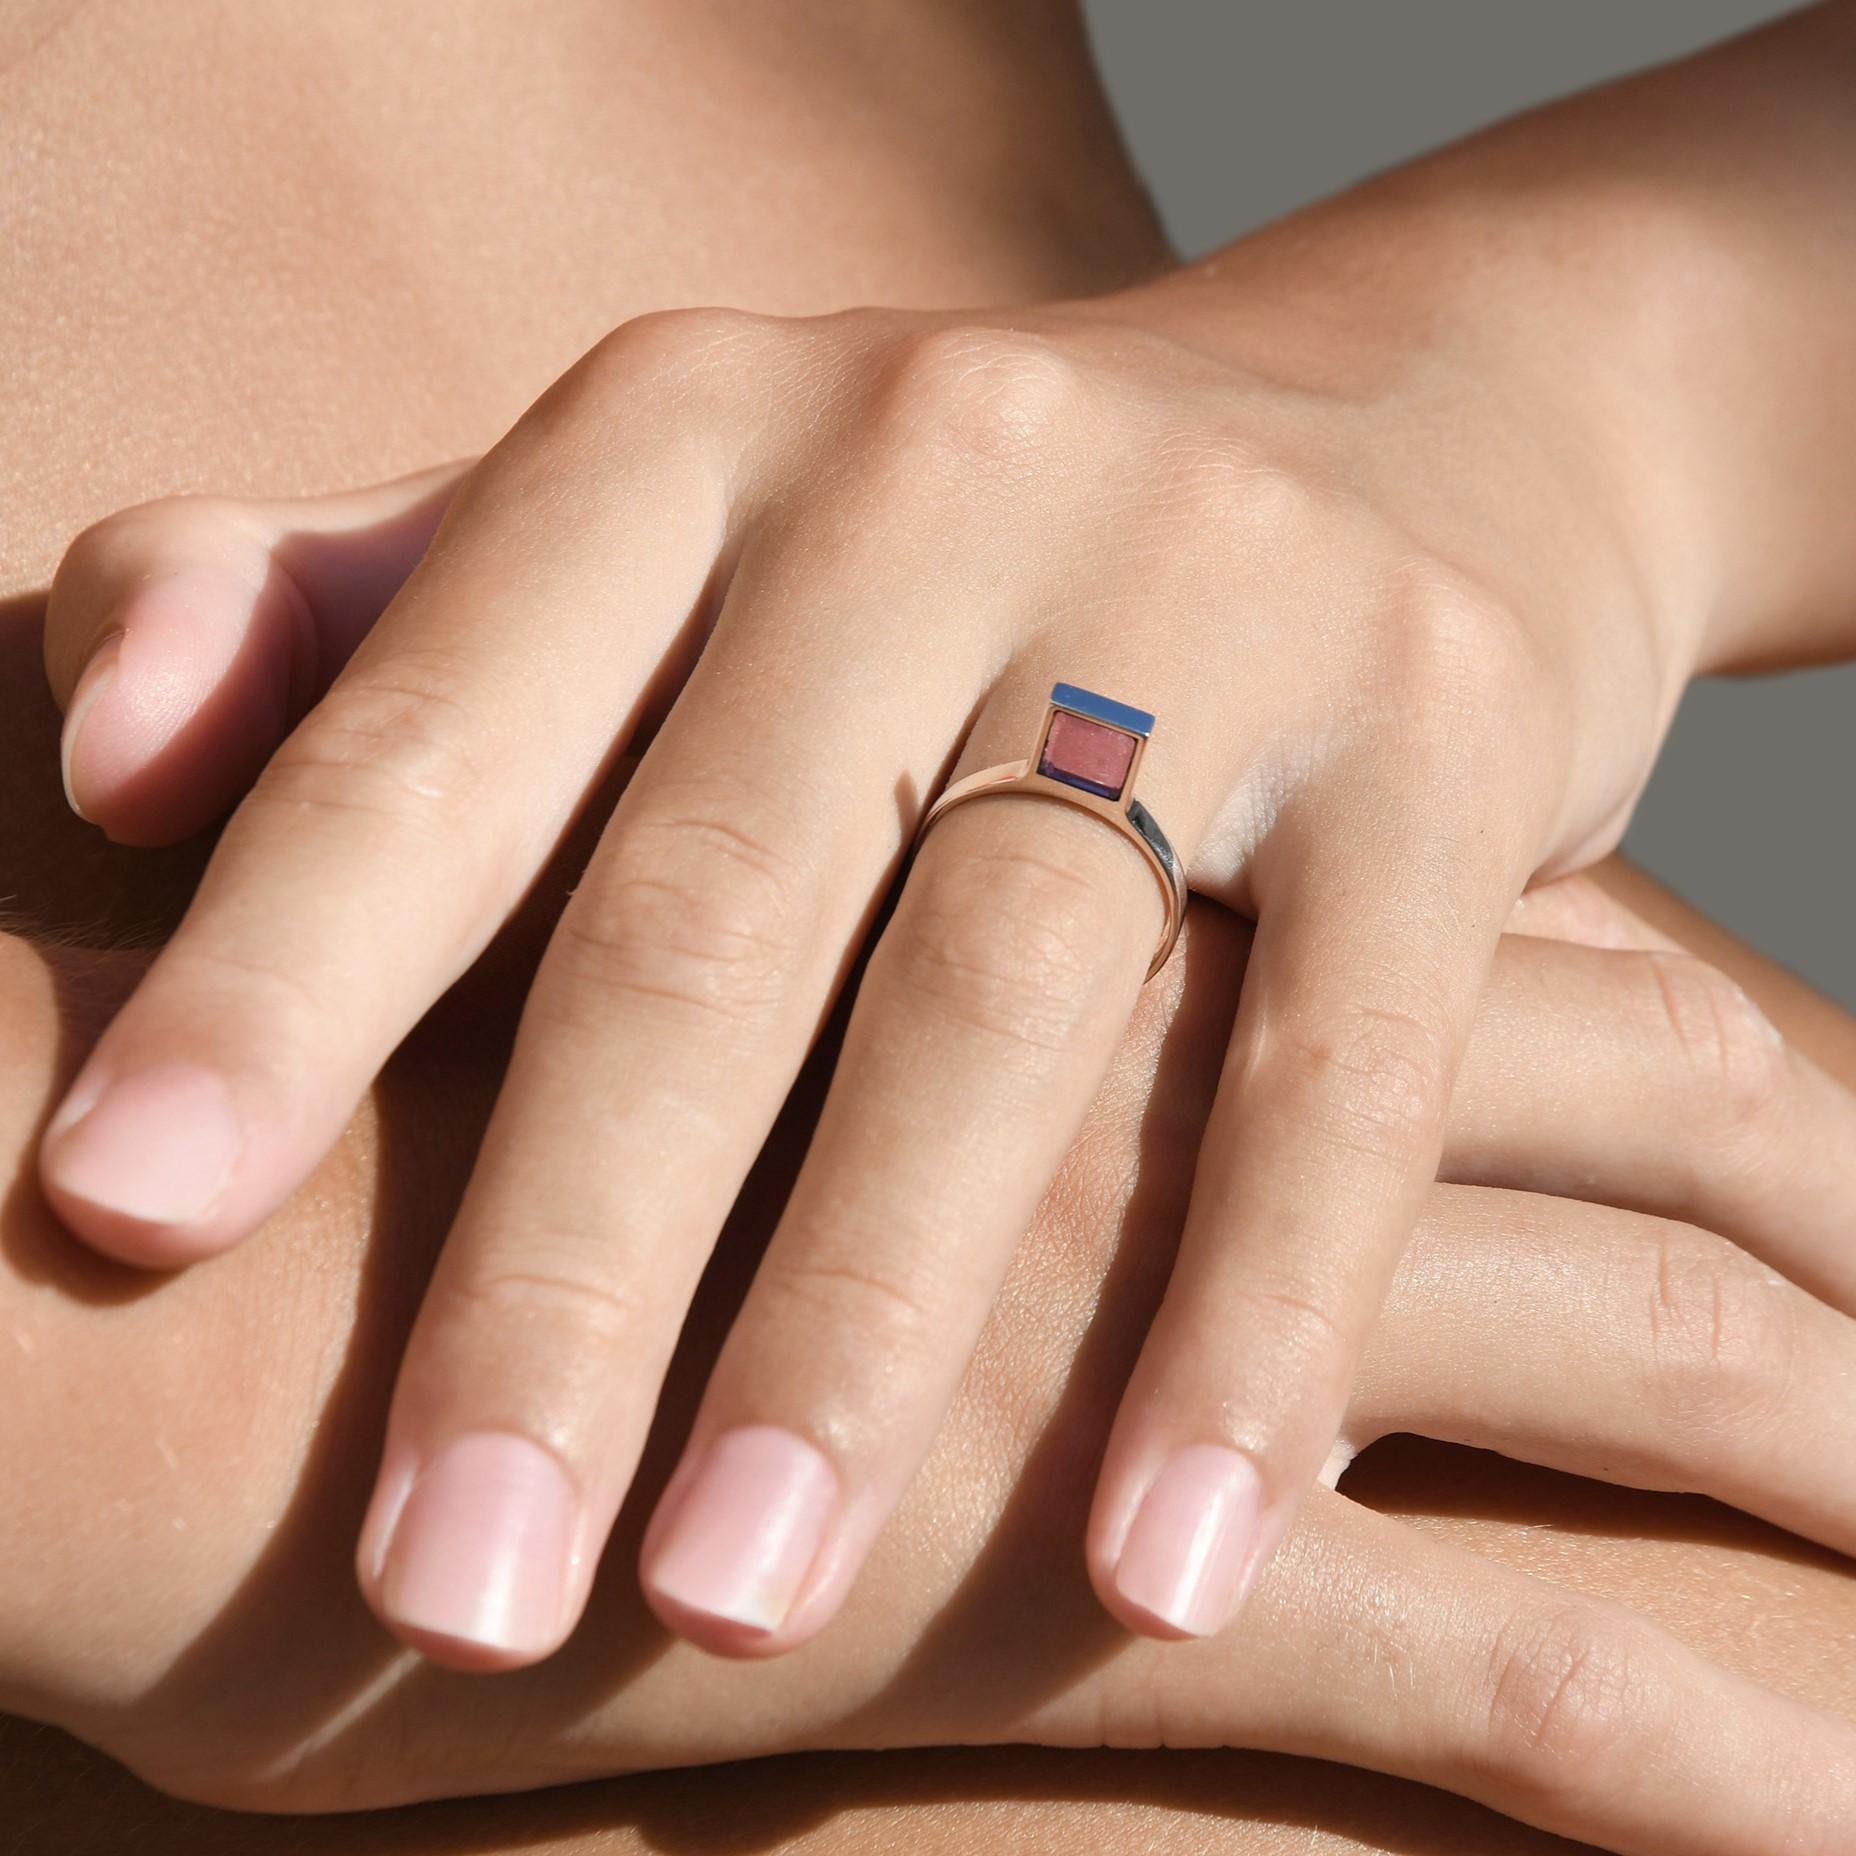 This innovative and contemporary ring, with its unique silhouette, was conceived by designer Michel Tortel for QITTERI. It features a major innovation: a new gem cut in a minimalist square shape in a vertical position. In this model, the amethyst is